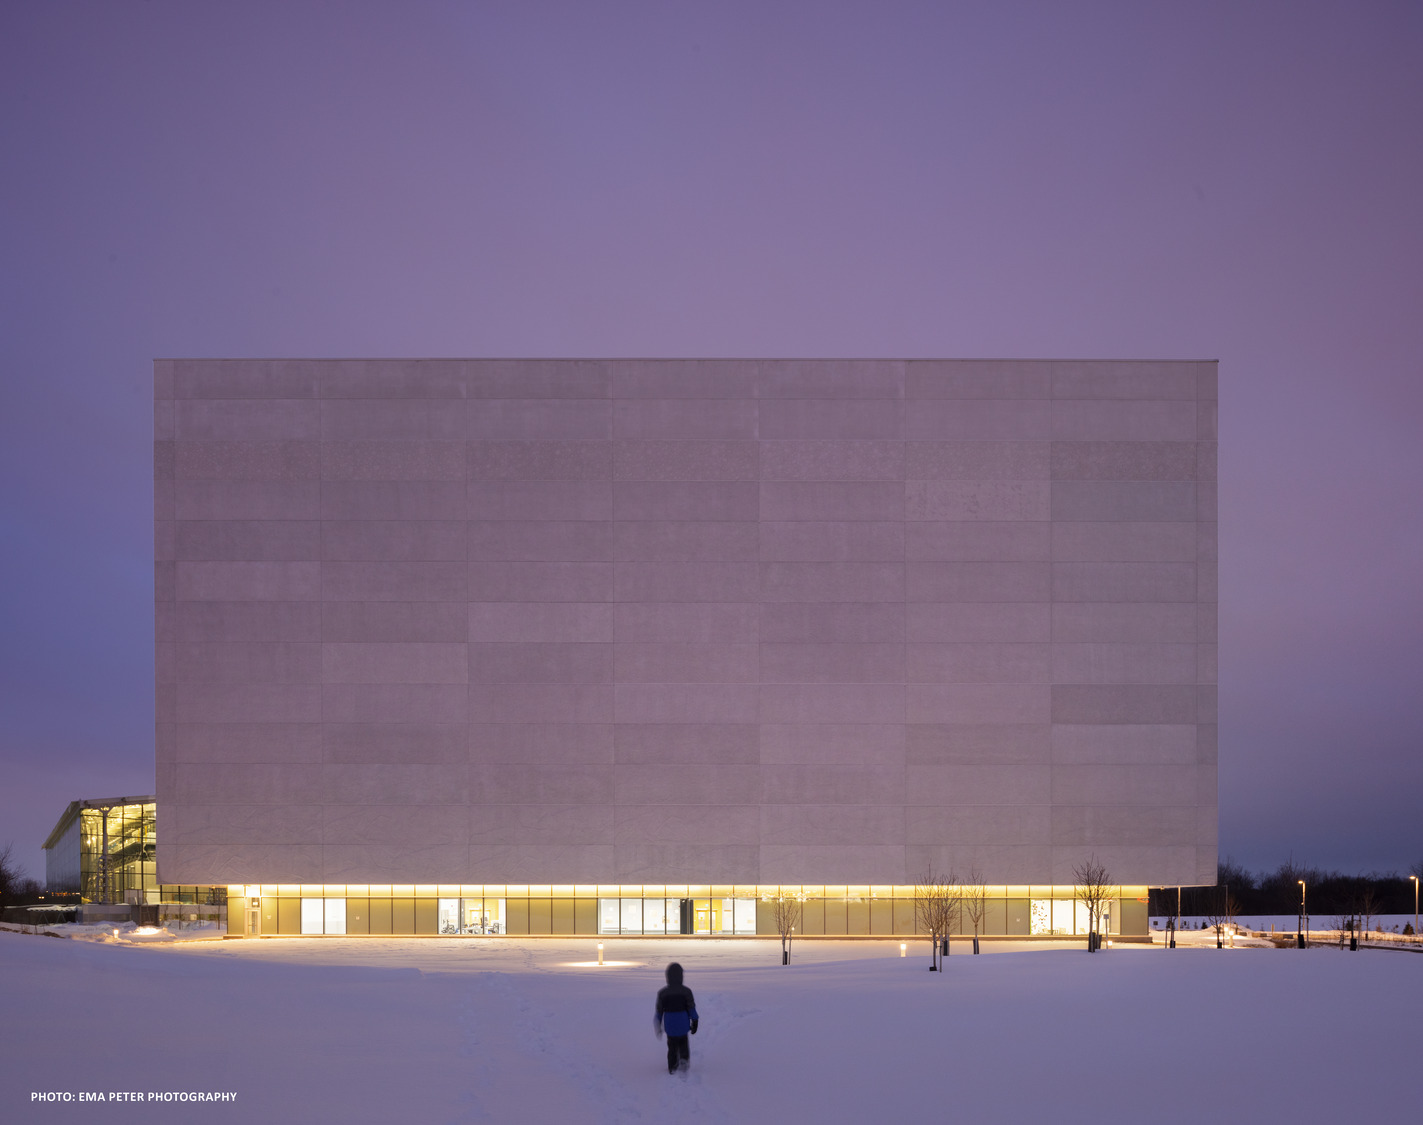 An illuminated modern building with a large, flat facade on a snowy landscape during twilight, with a person approaching on a footpath.